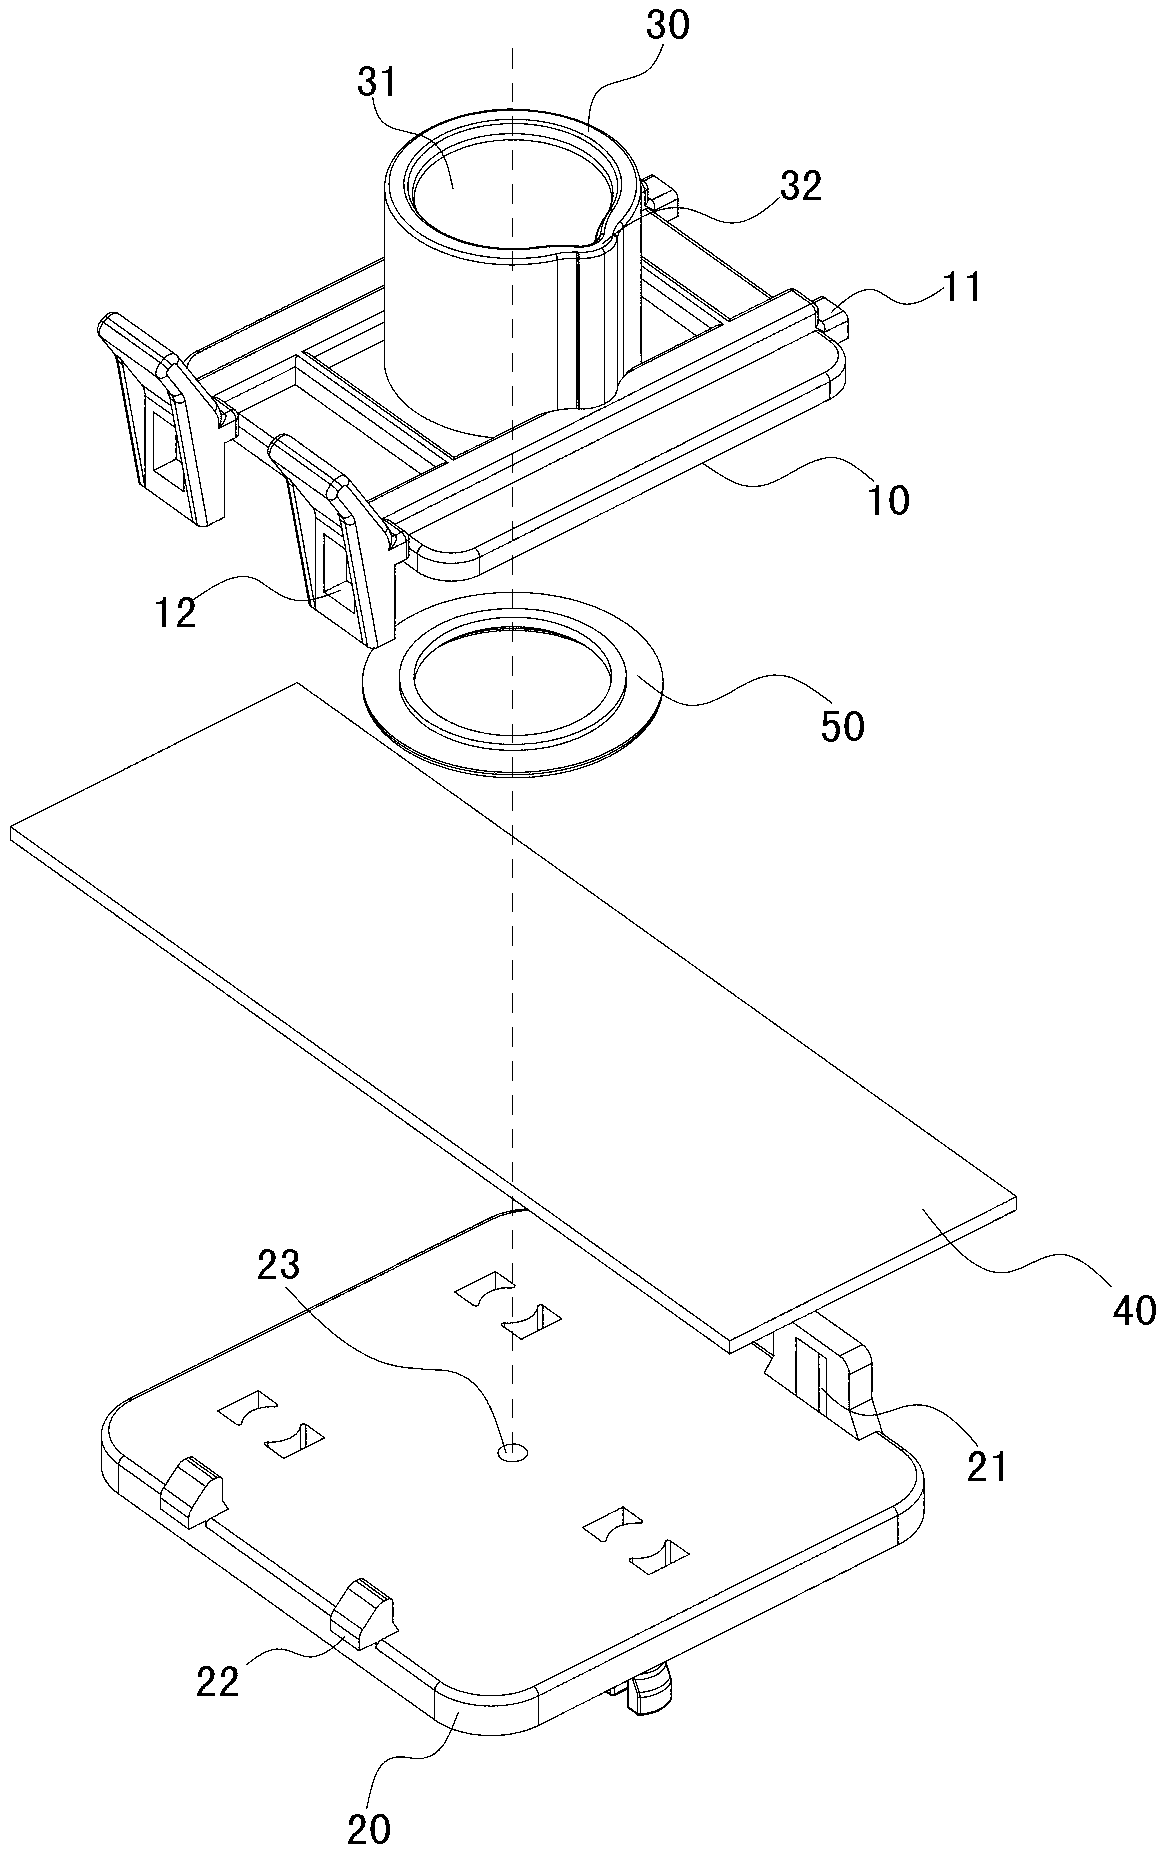 Sample reaction cabin and detection reagent adding method